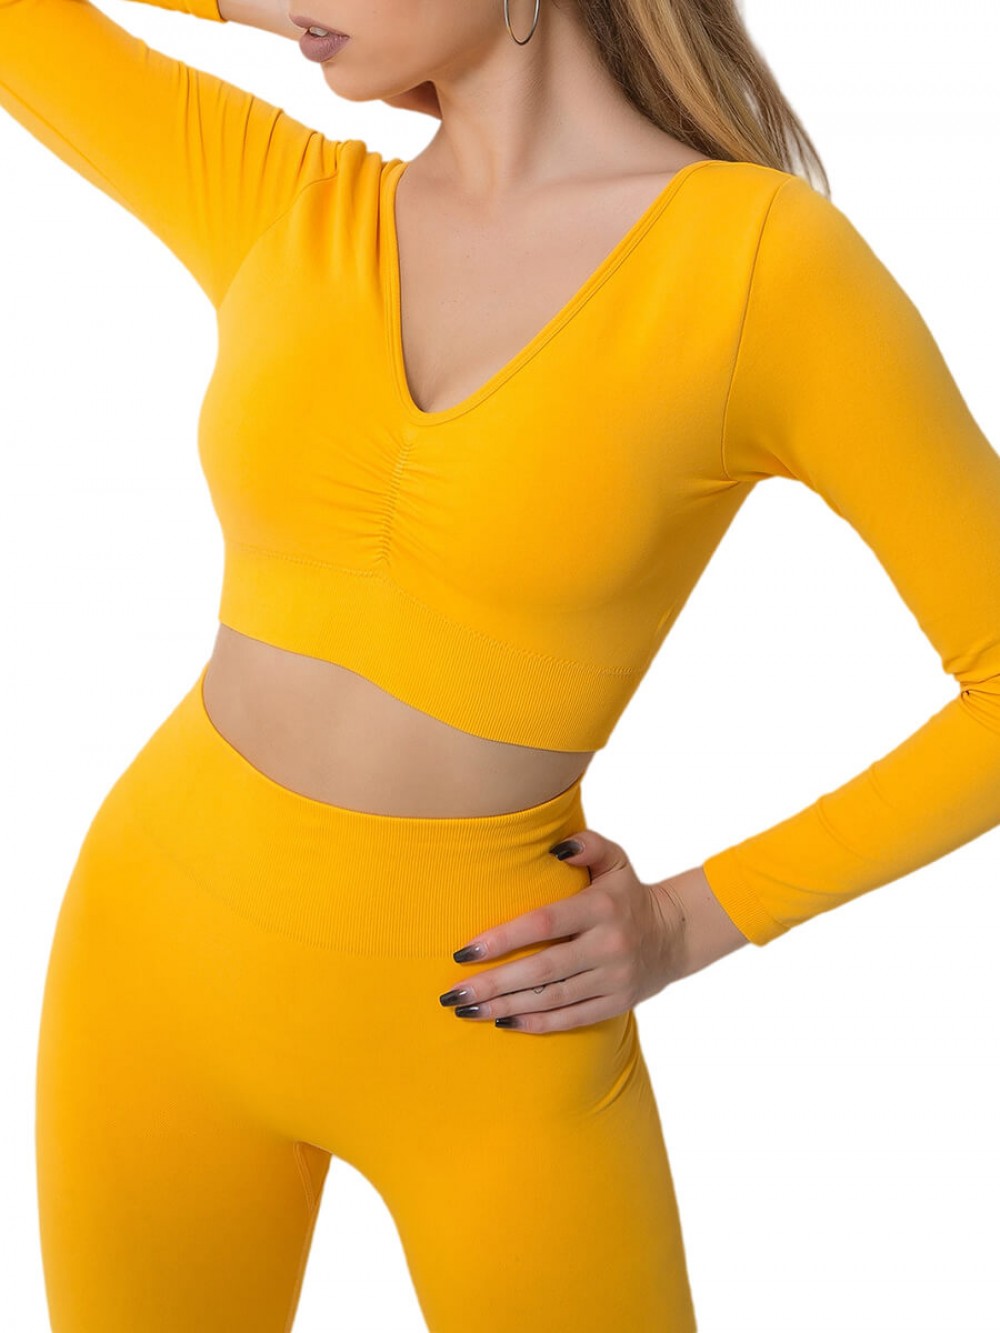 Yellow Stretchable Dreamlike Workout Apparel For Ladies